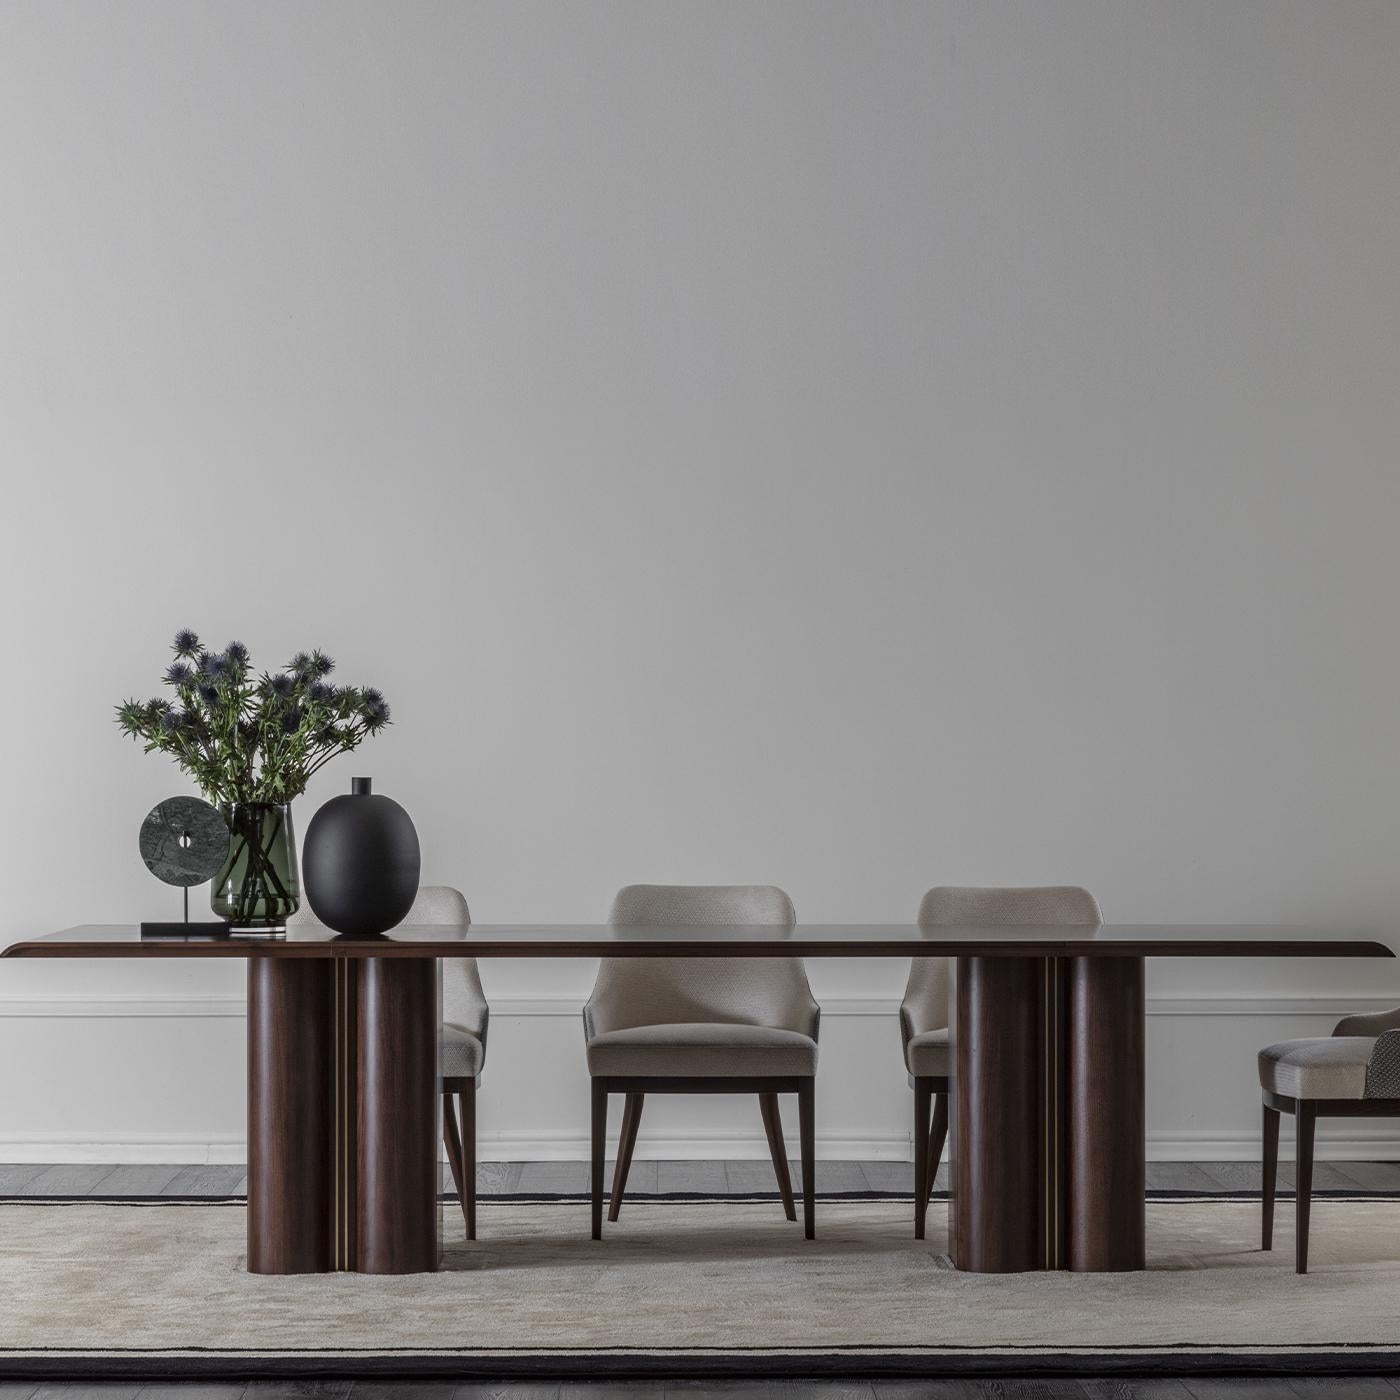 Ideal to be gathered with twins around a modern table, this dining armchair exudes subtle and timeless elegance. Its walnut frame finished in matte tobacco is visible through the tapered legs, its deep hue conflicting with the off-white fabric